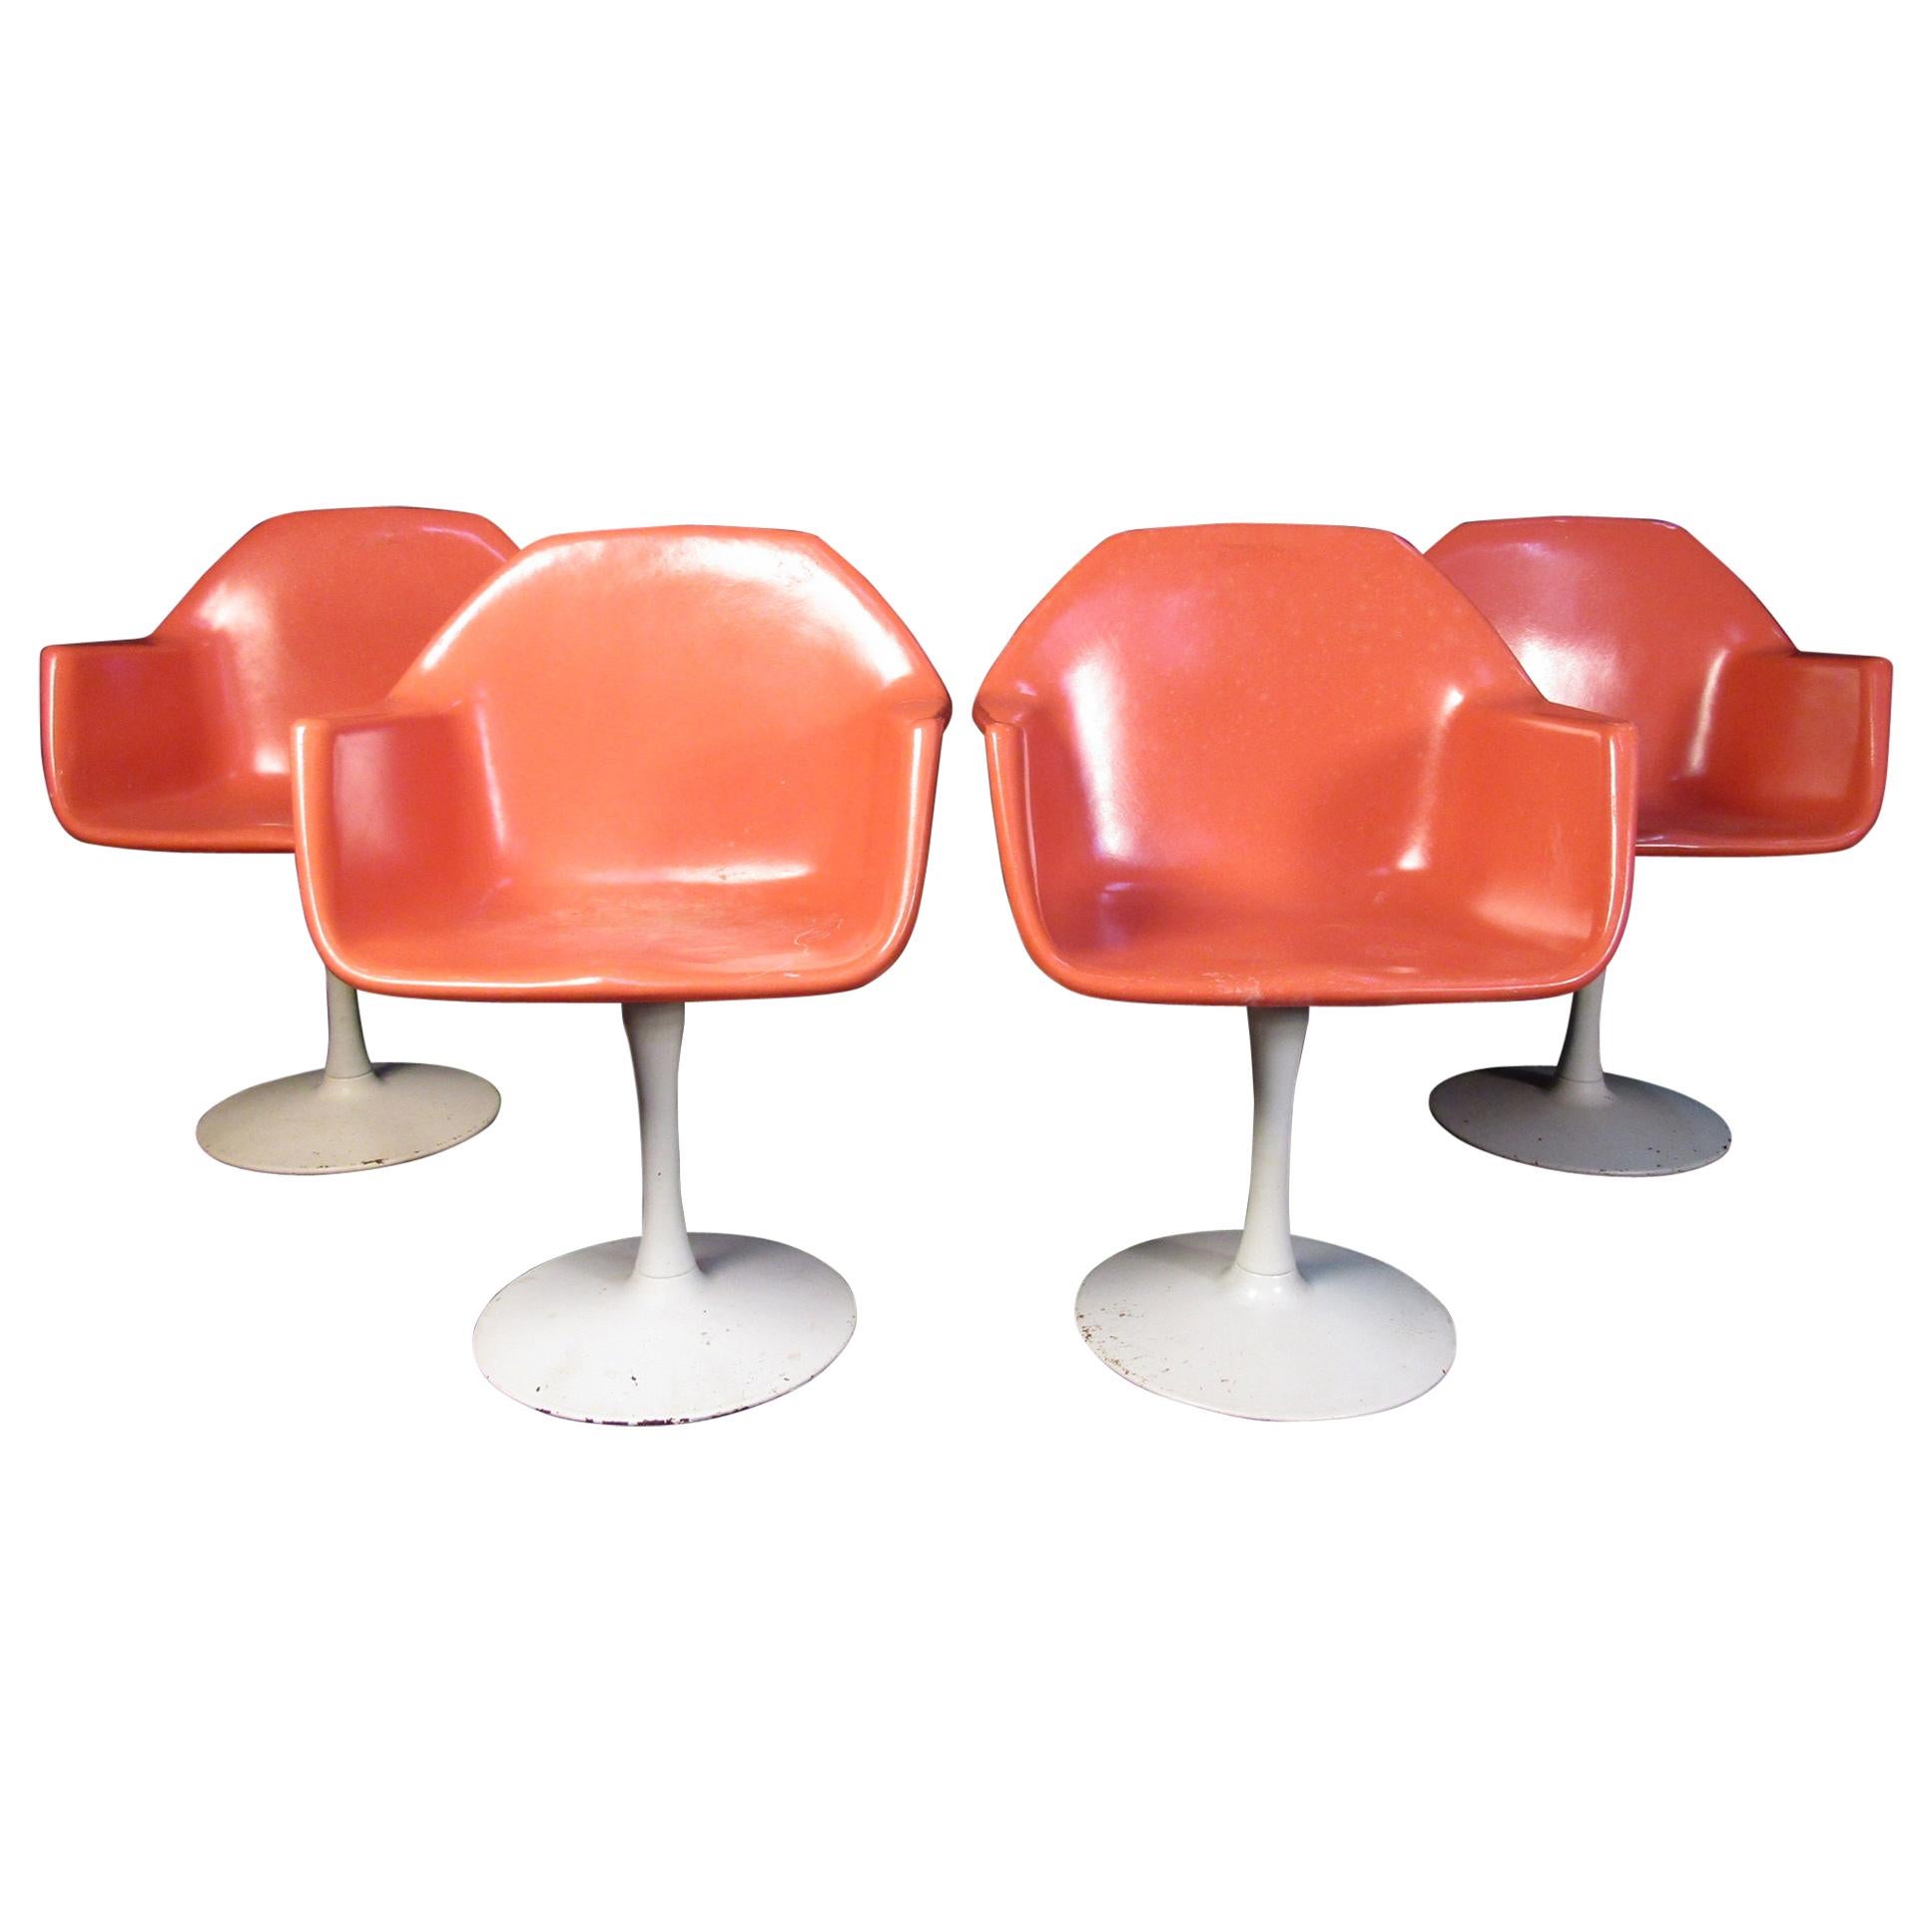 Set of Four Mid-Century Tulip Chairs